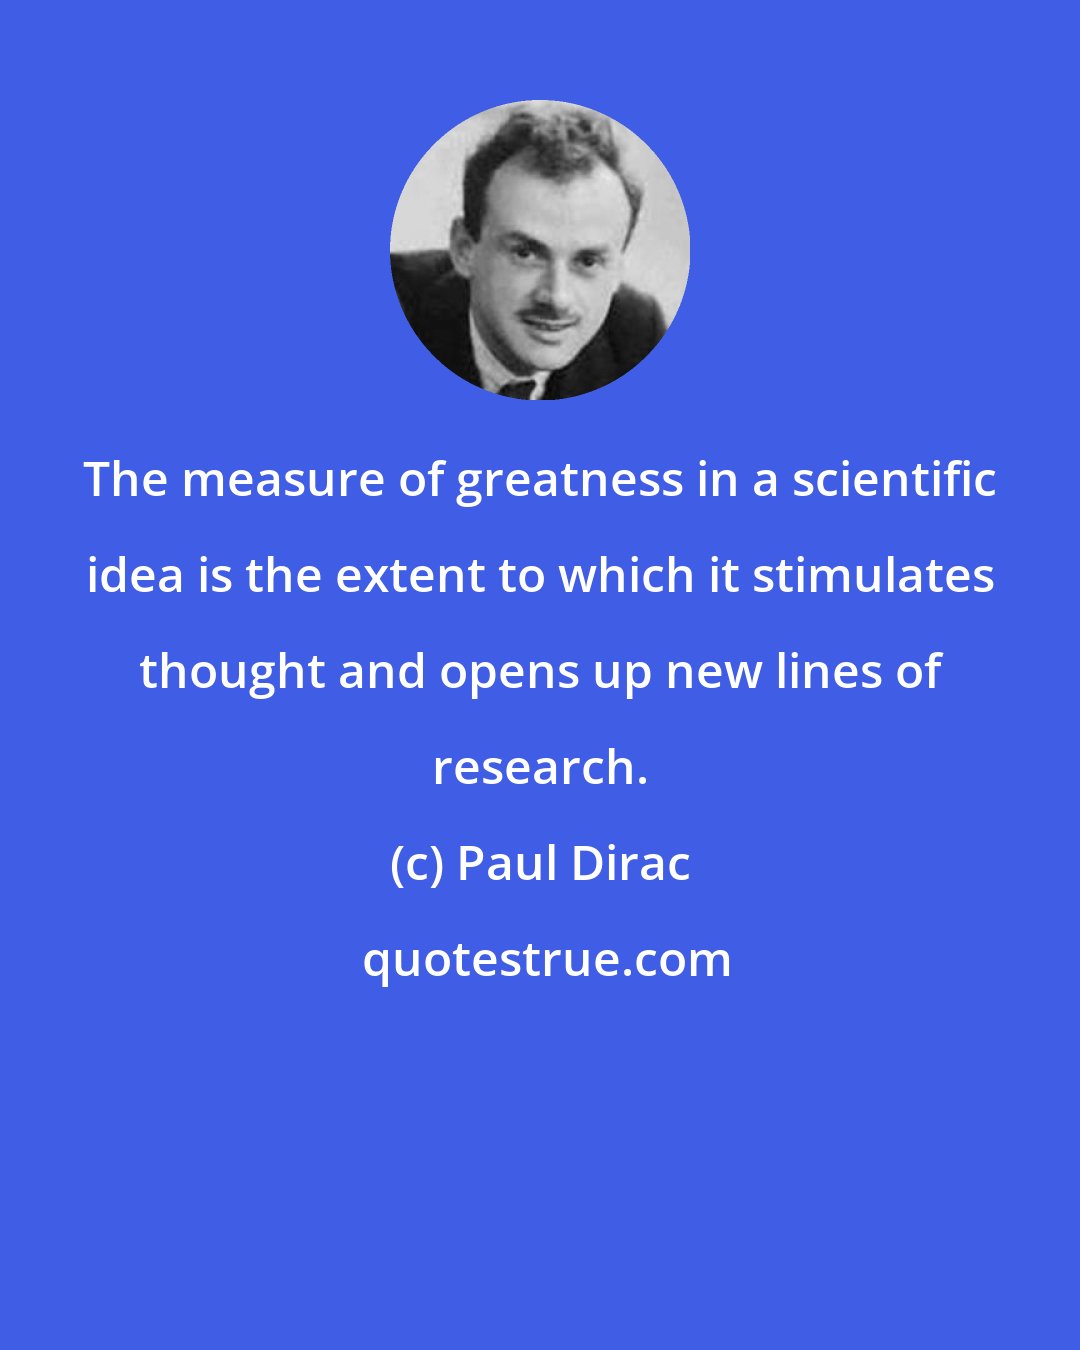 Paul Dirac: The measure of greatness in a scientific idea is the extent to which it stimulates thought and opens up new lines of research.